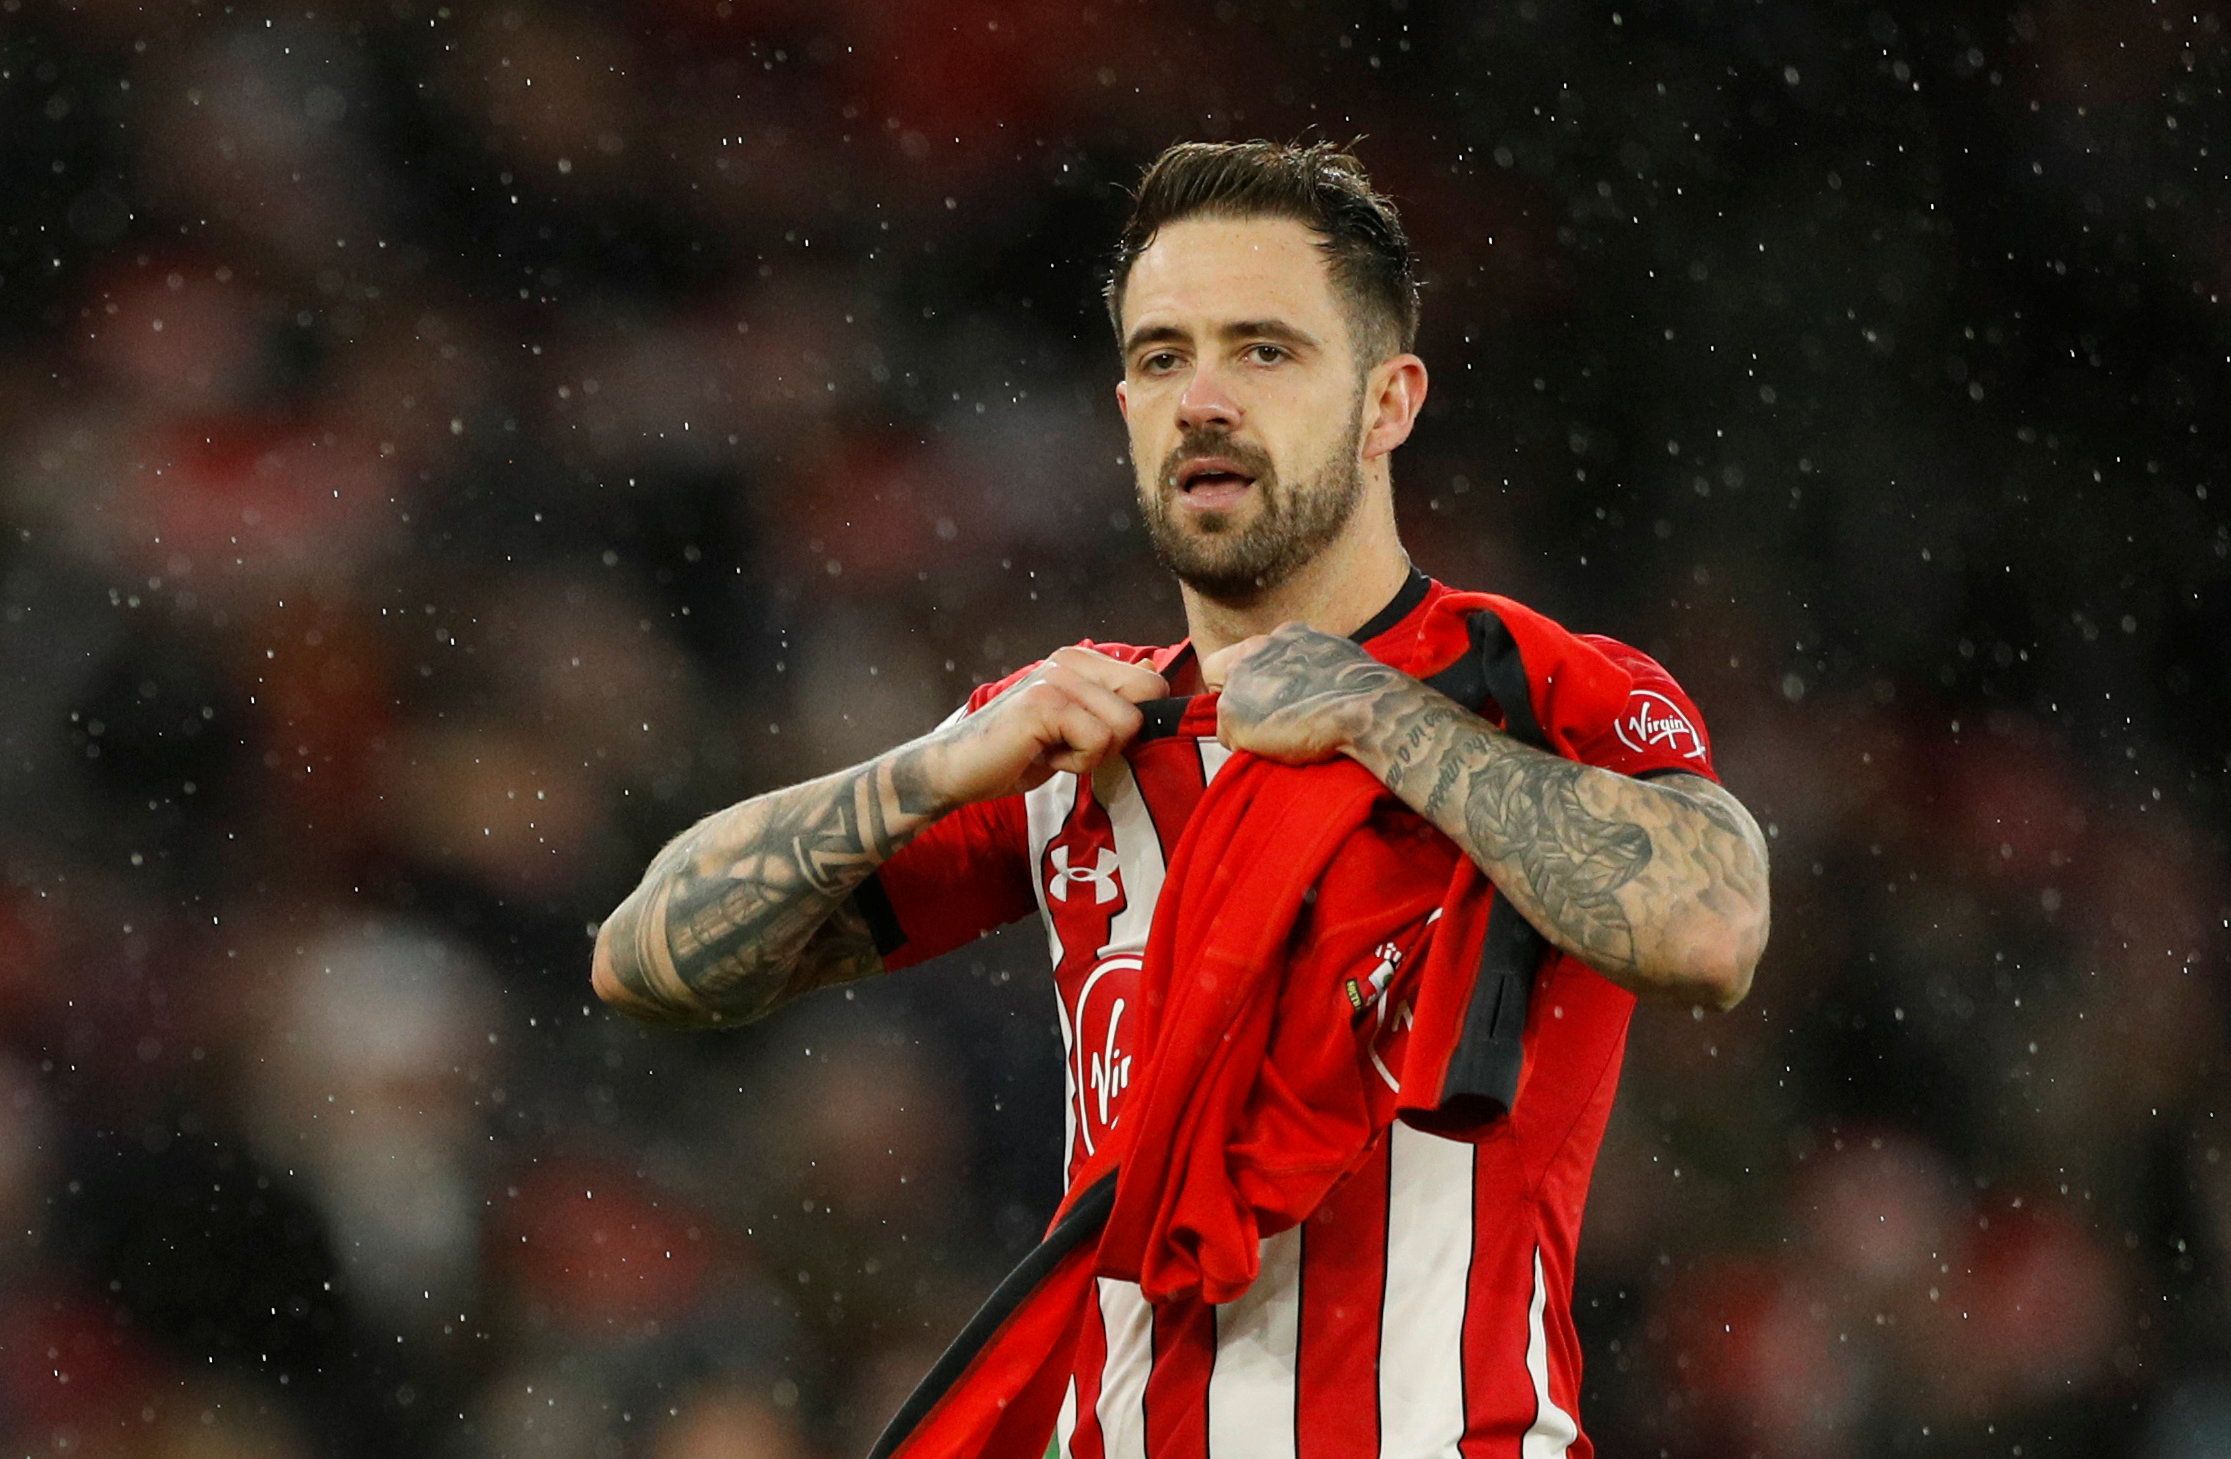 Soccer Football - Premier League - Southampton v Arsenal - St Mary's Stadium, Southampton, Britain - December 16, 2018  Southampton's Danny Ings celebrates at the end of the match   Action Images via Reuters/John Sibley  EDITORIAL USE ONLY. No use with unauthorized audio, video, data, fixture lists, club/league logos or 